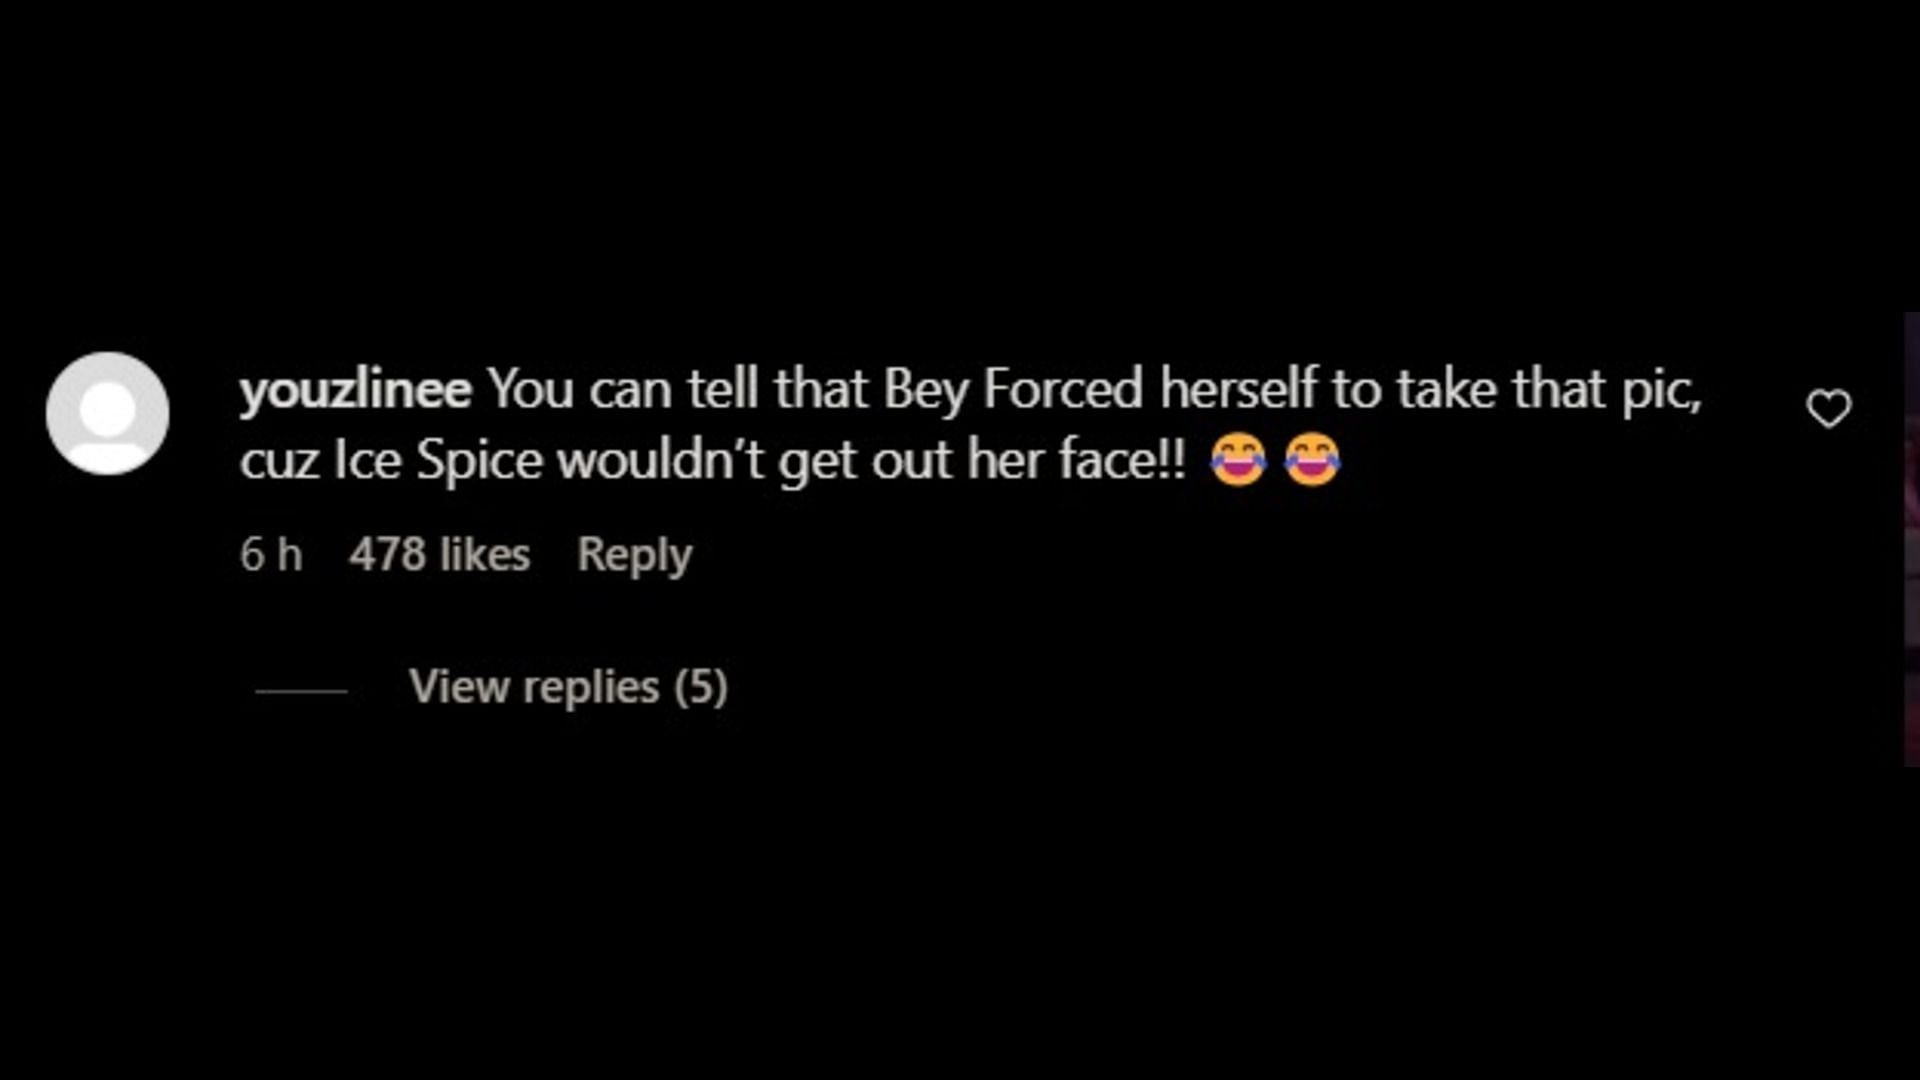 Fans react to the interaction between Ice and Beyonc&eacute;. (Image via Instagram/@youzlinee)